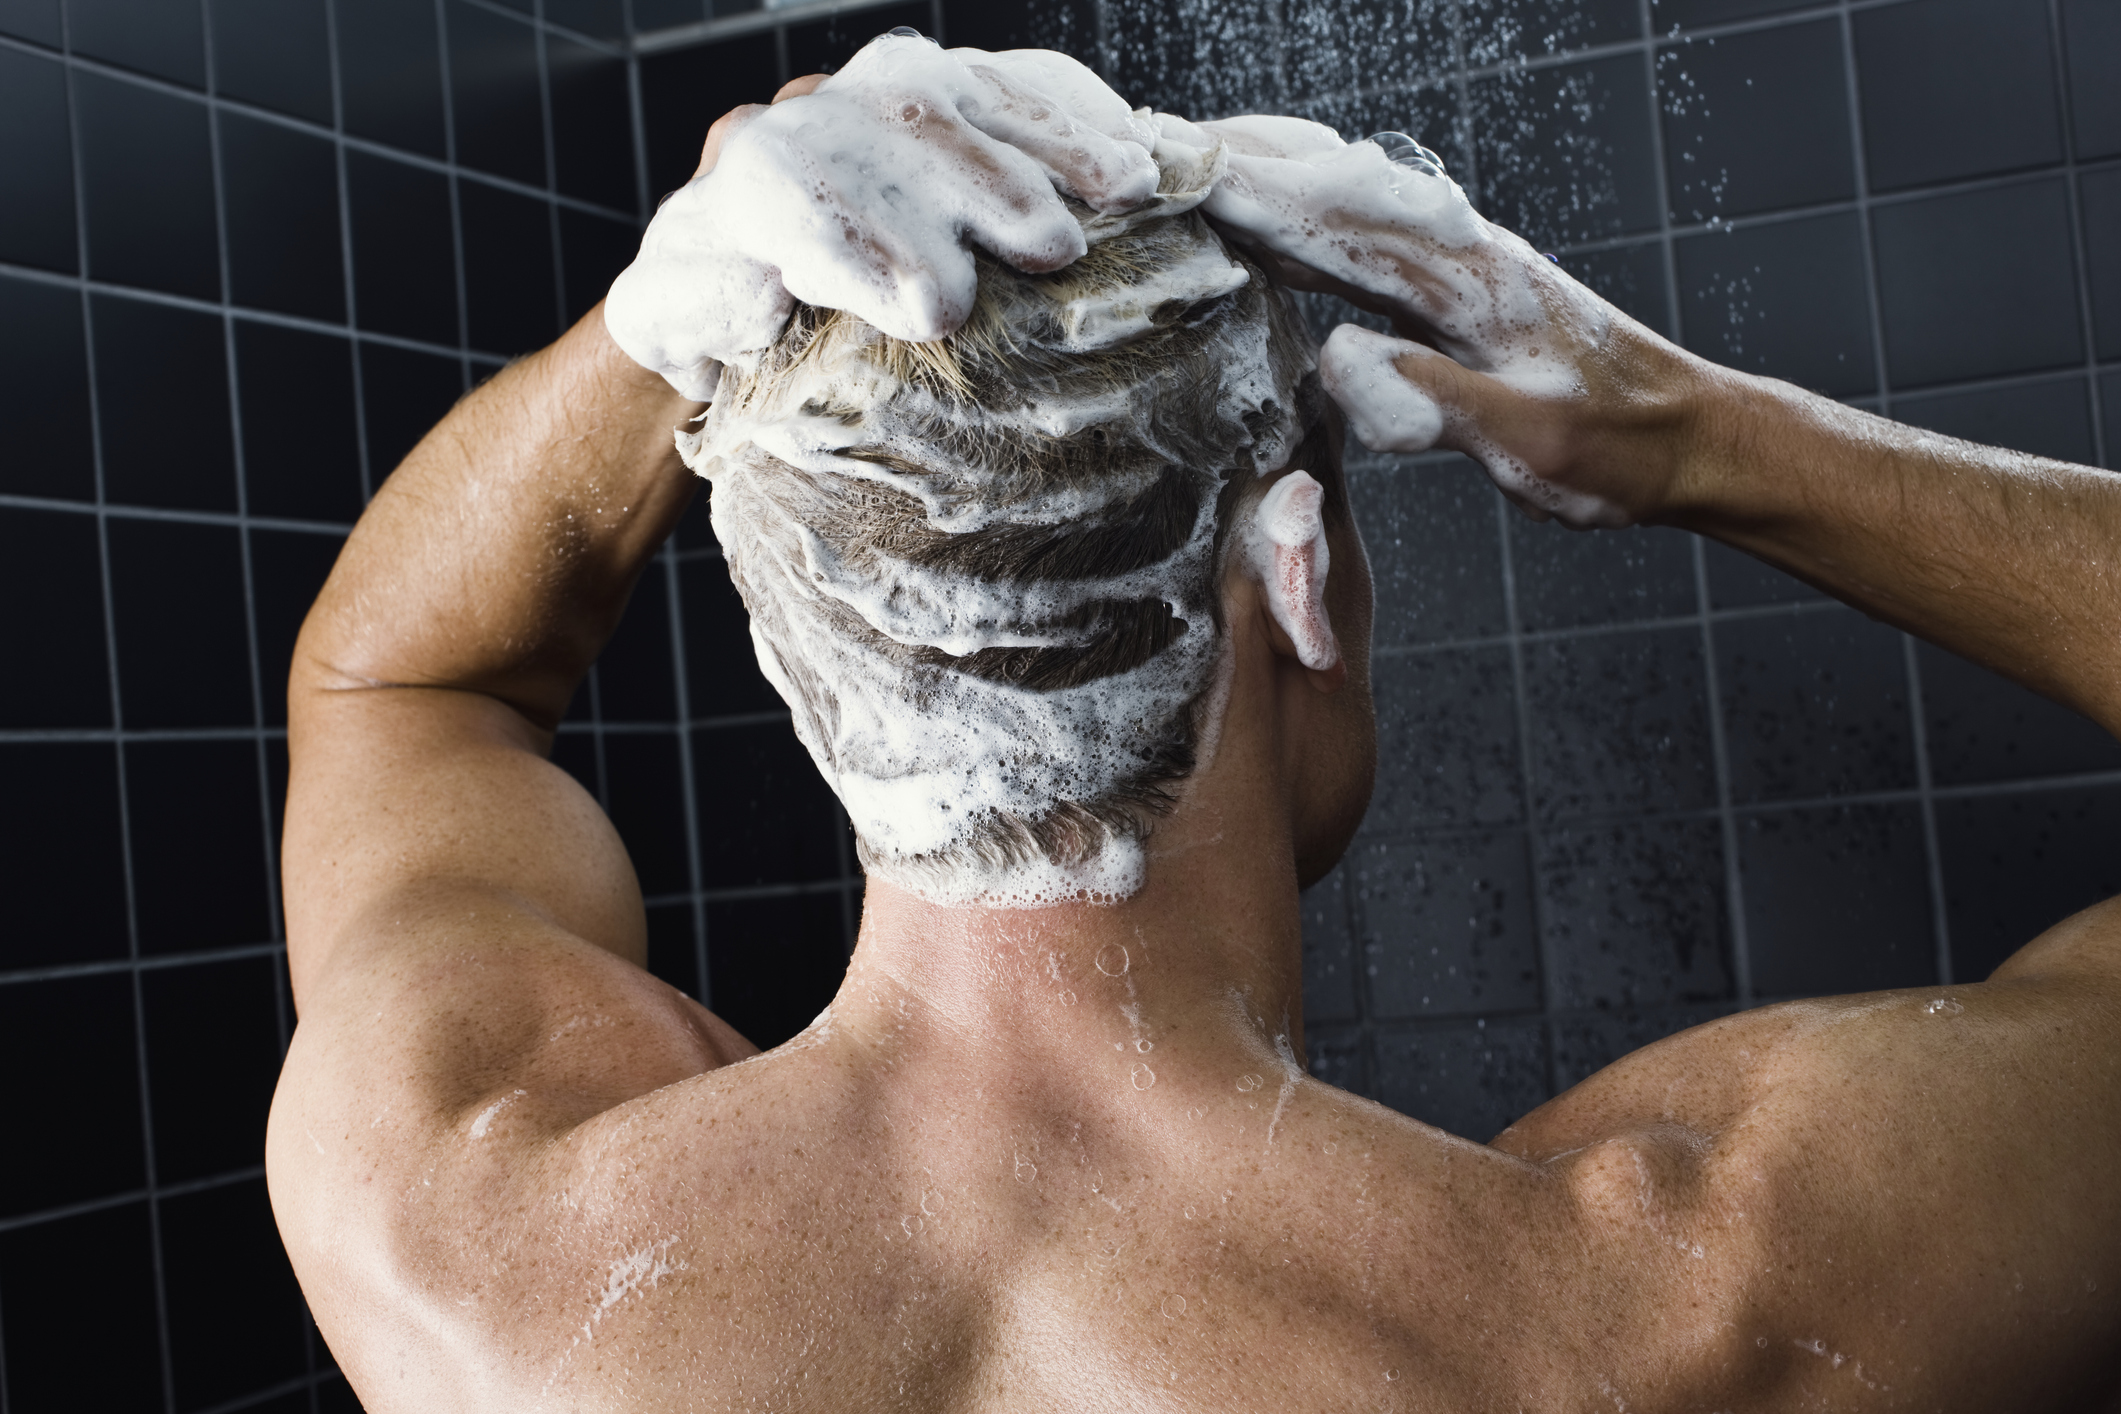 A man taking a shower | Source: Getty Images